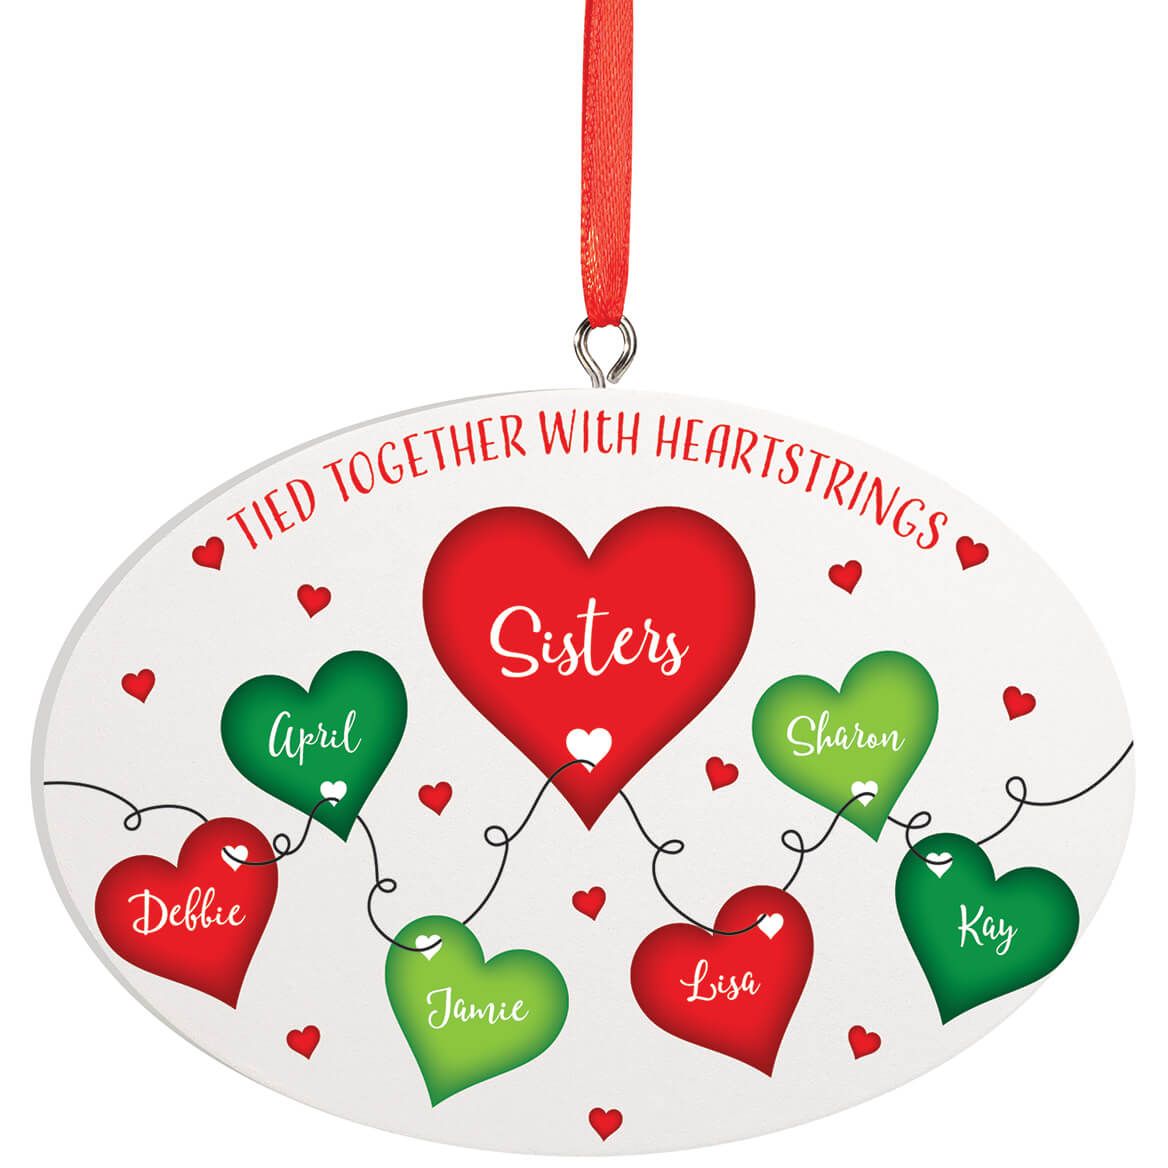 Personalized "Tied Together With Heartstrings" Ornament + '-' + 374223